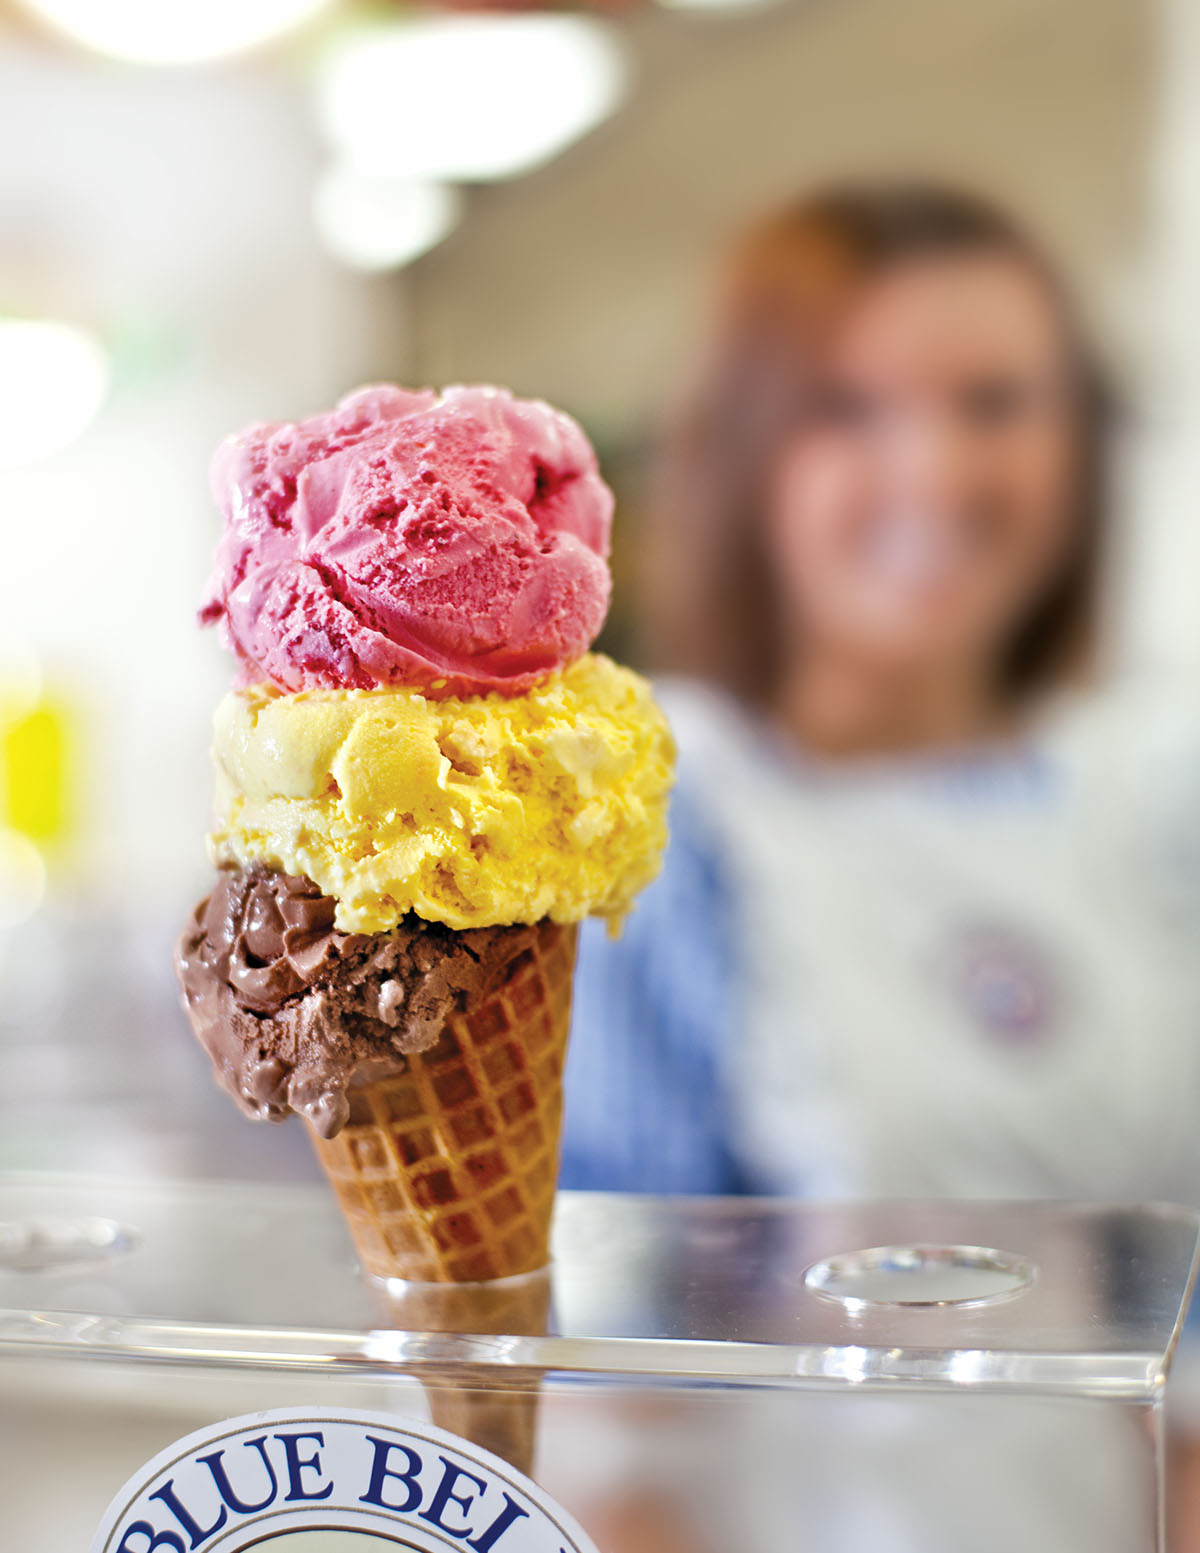 A pink, yellow and brown scoop of ice cream perched in a waffle cone with a woman smiling in the background